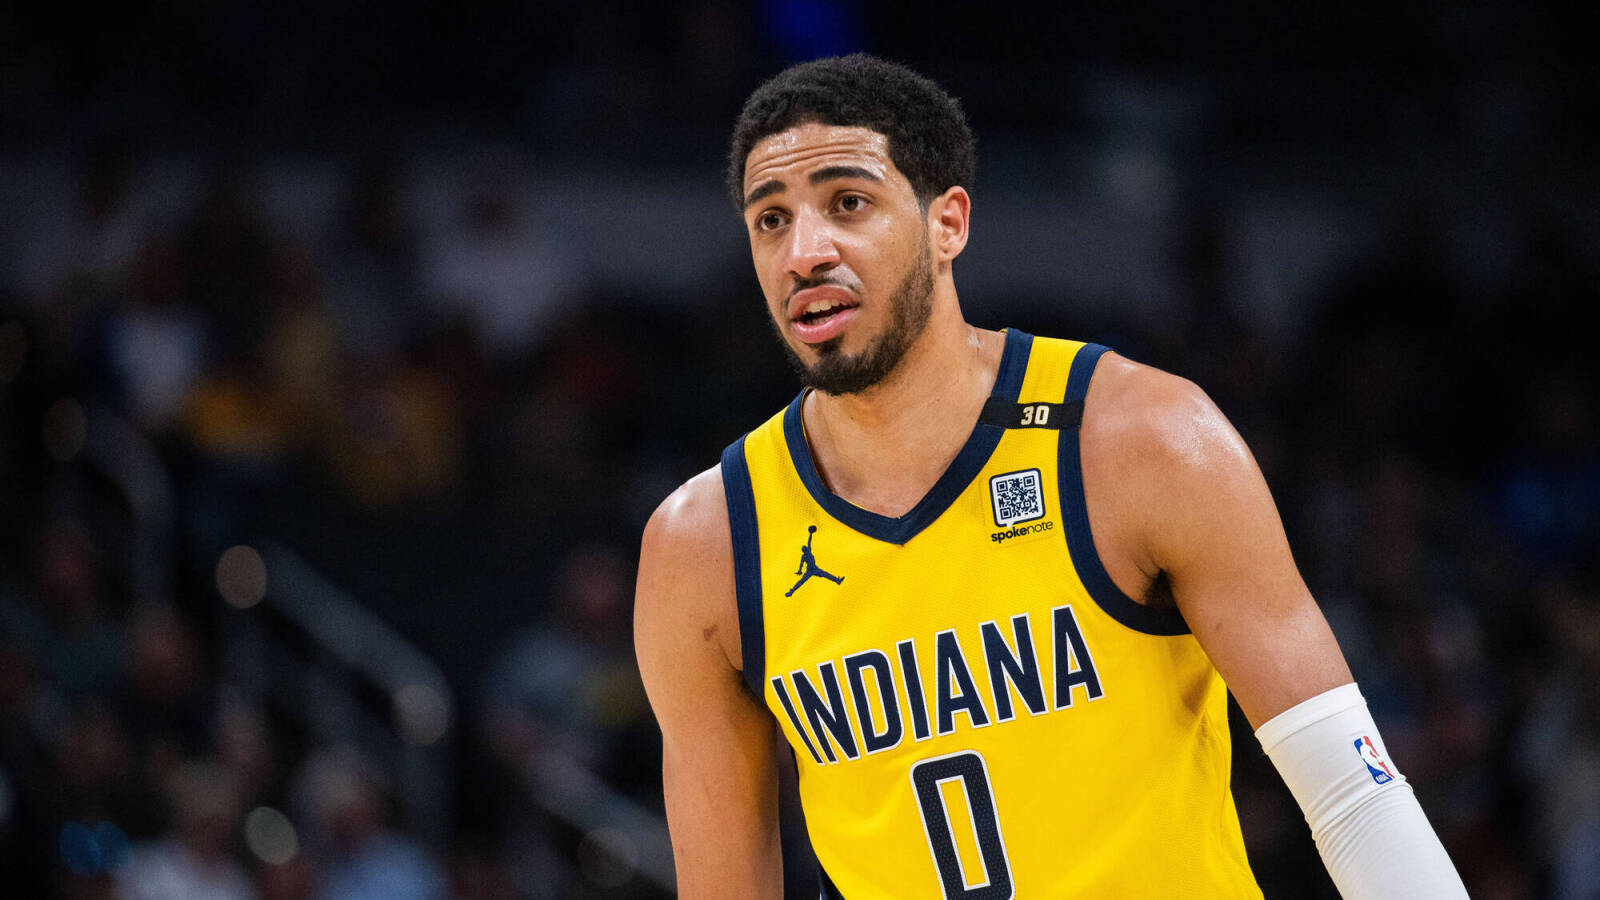 Tyrese Haliburton gets in dig on Bucks fans after Pacers win